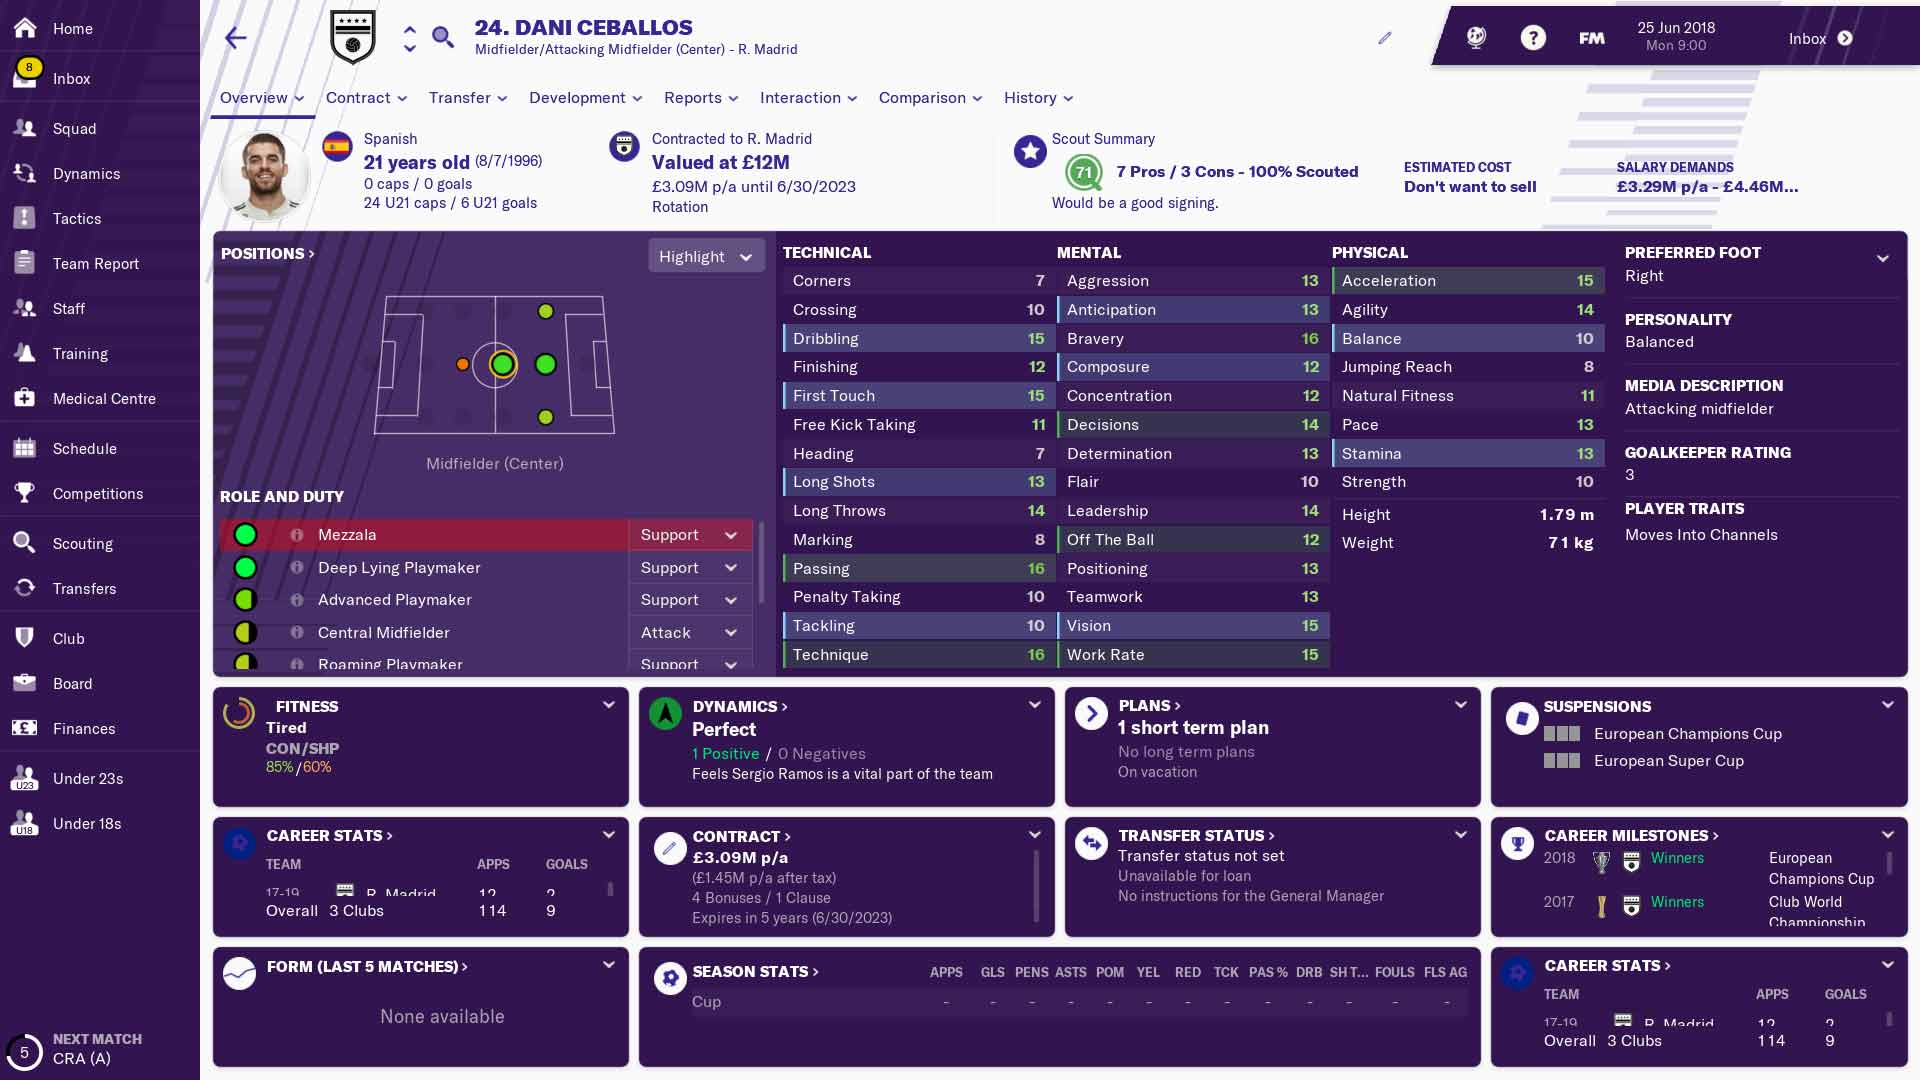 Football Manager 2020 Beta Release Date